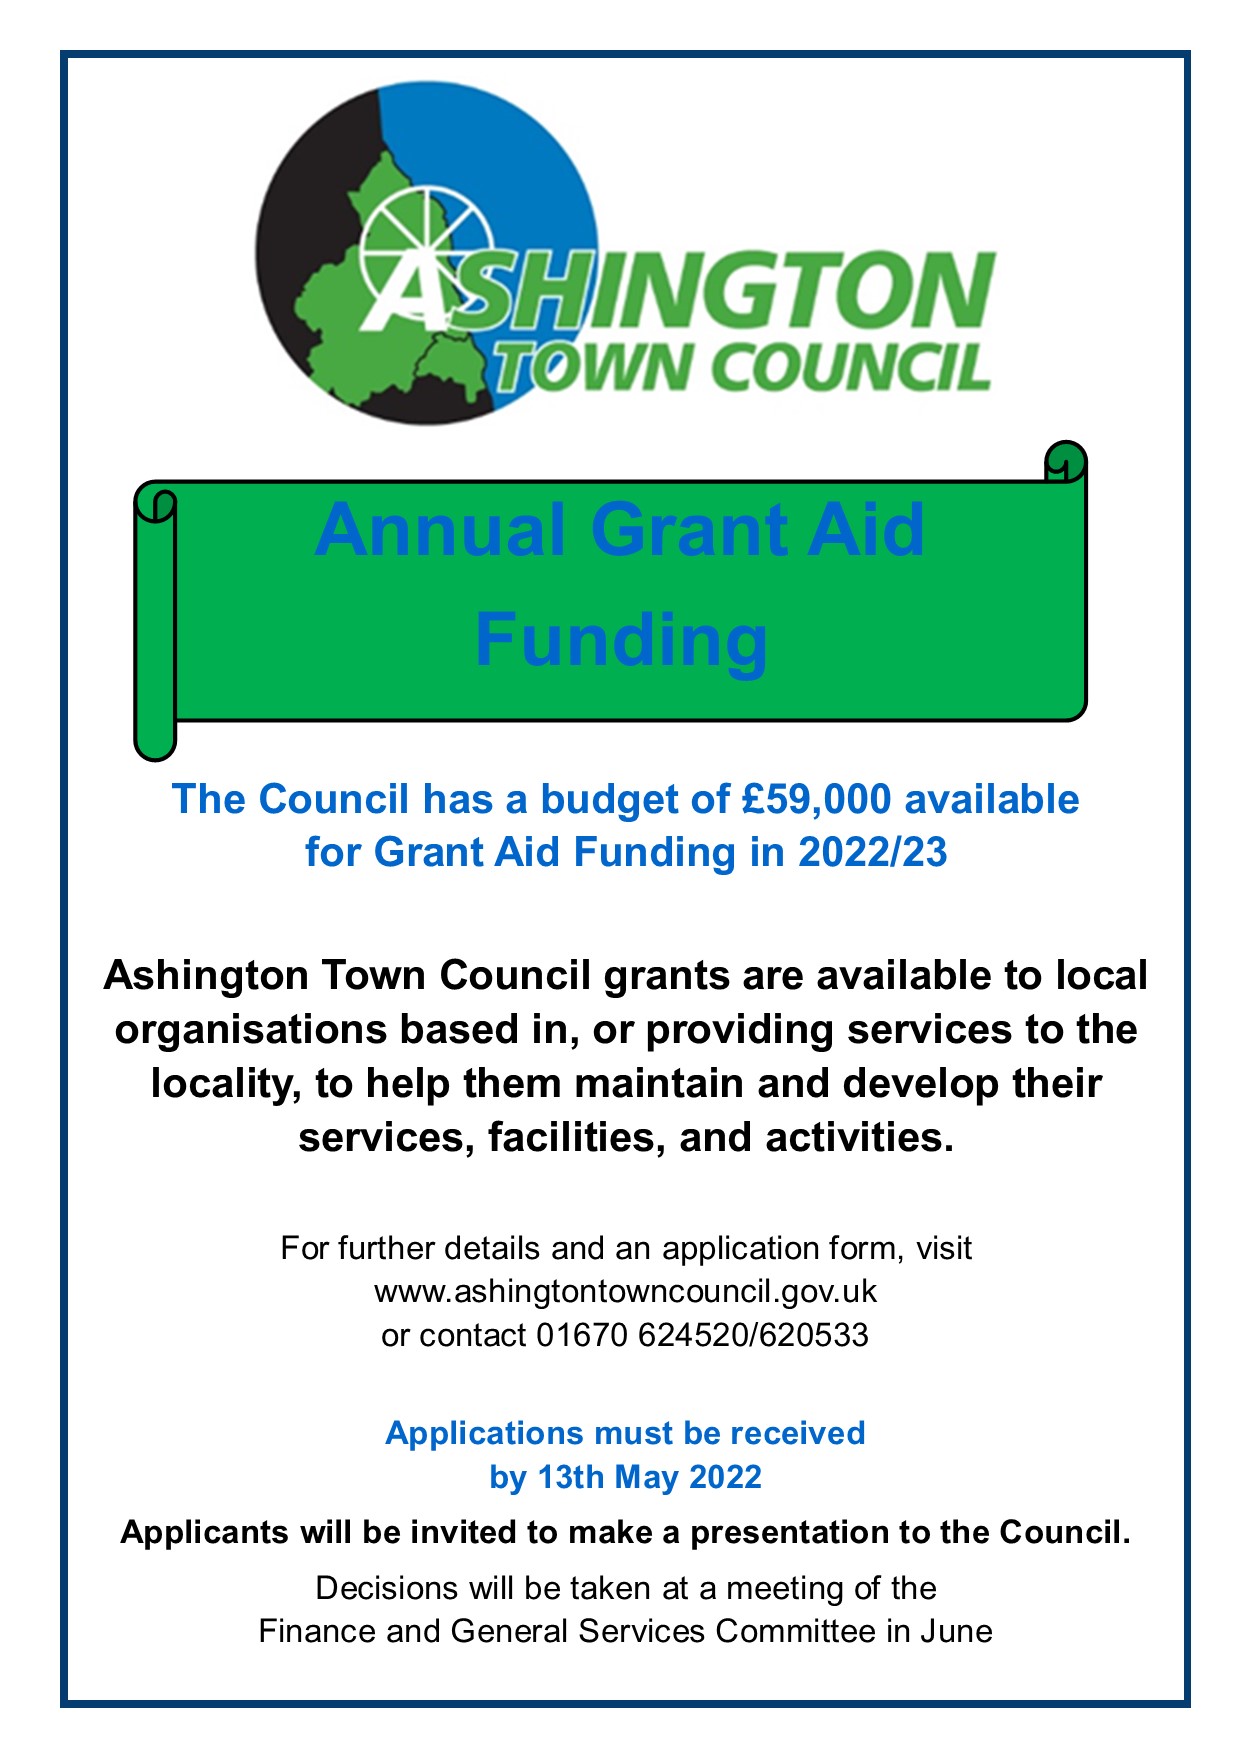 REMINDER - Applications for Annual Grant Aid Funding